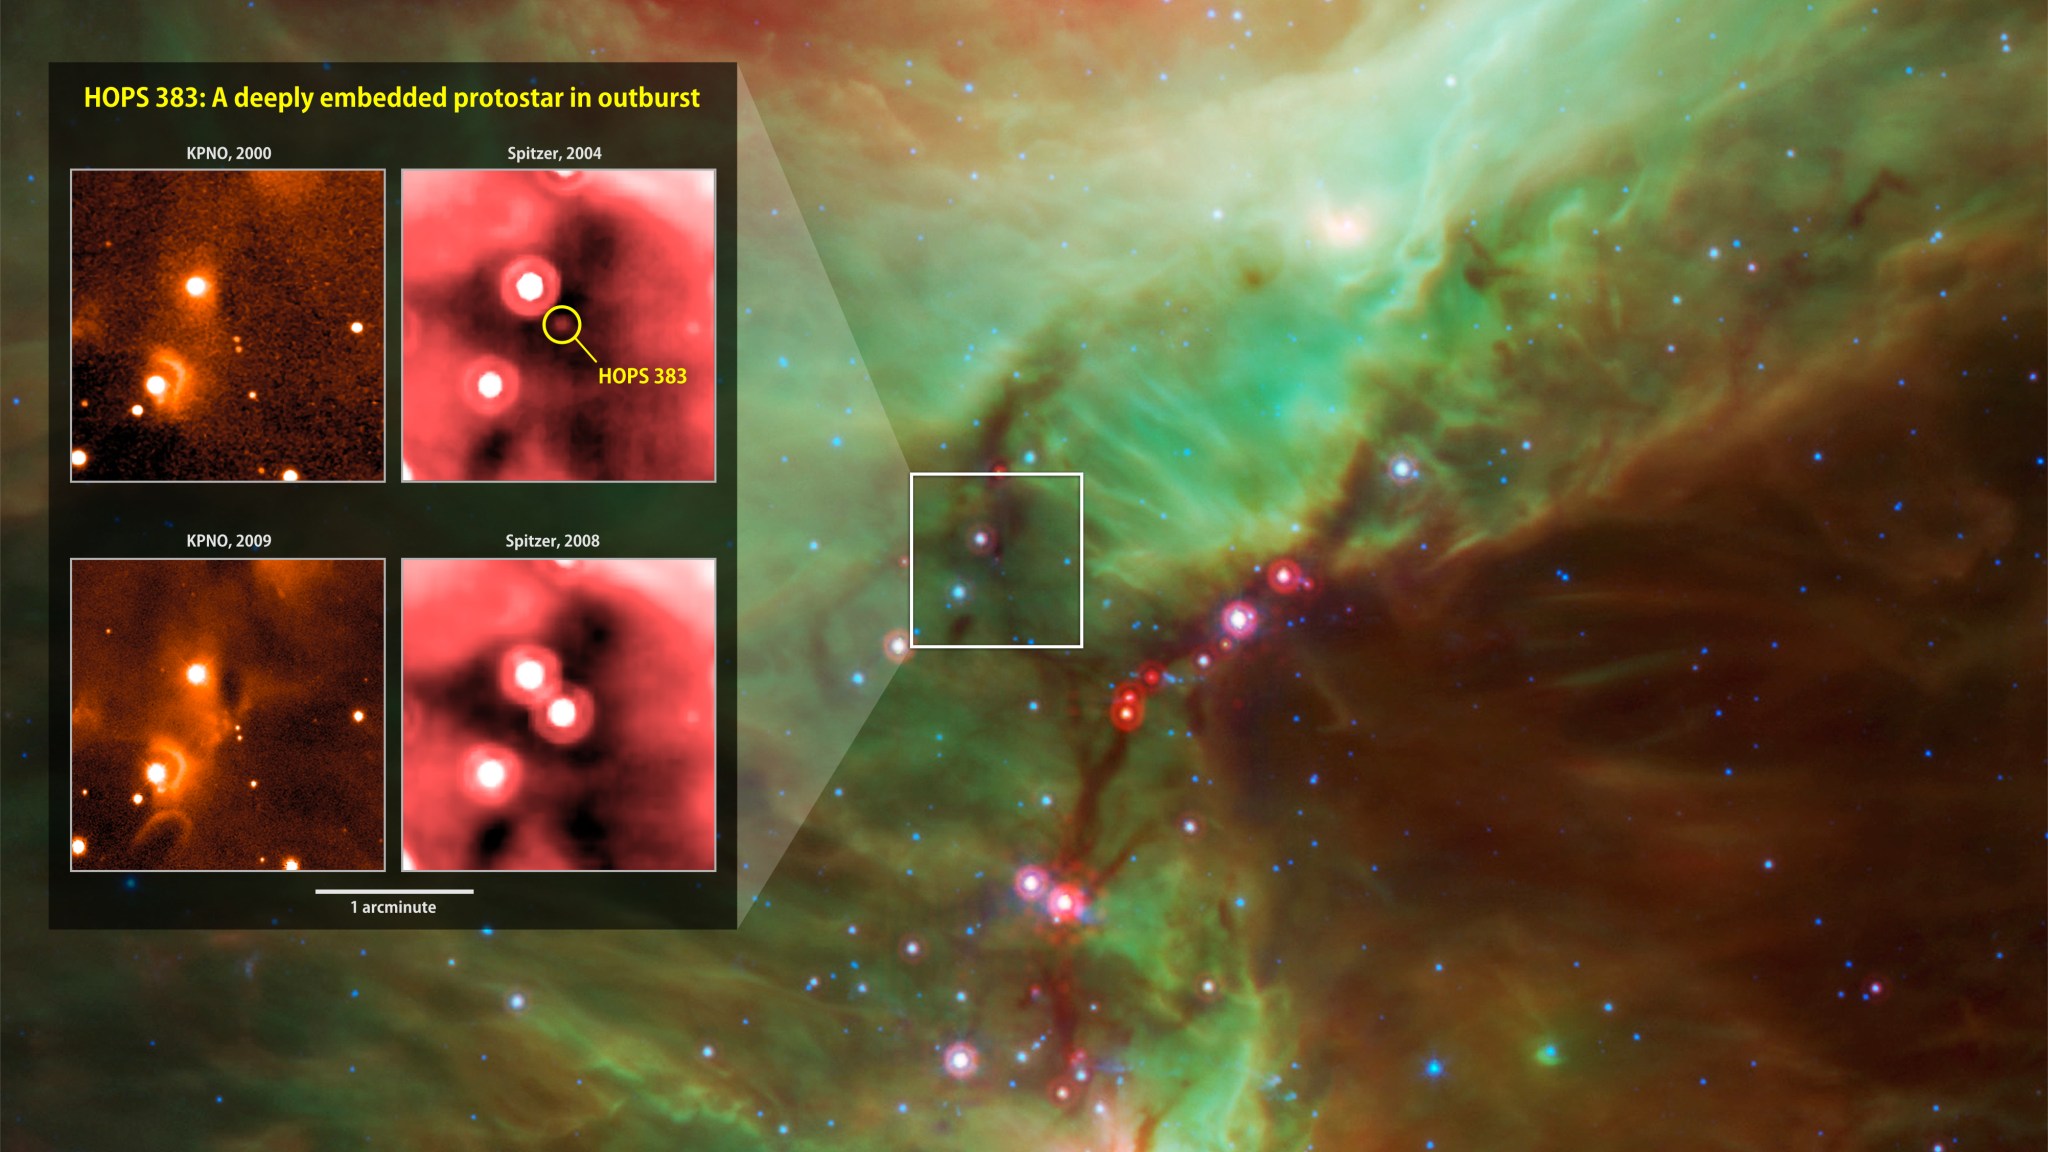 mosaic of images of HOPS 383, a young protostar in the Orion star-formation complex